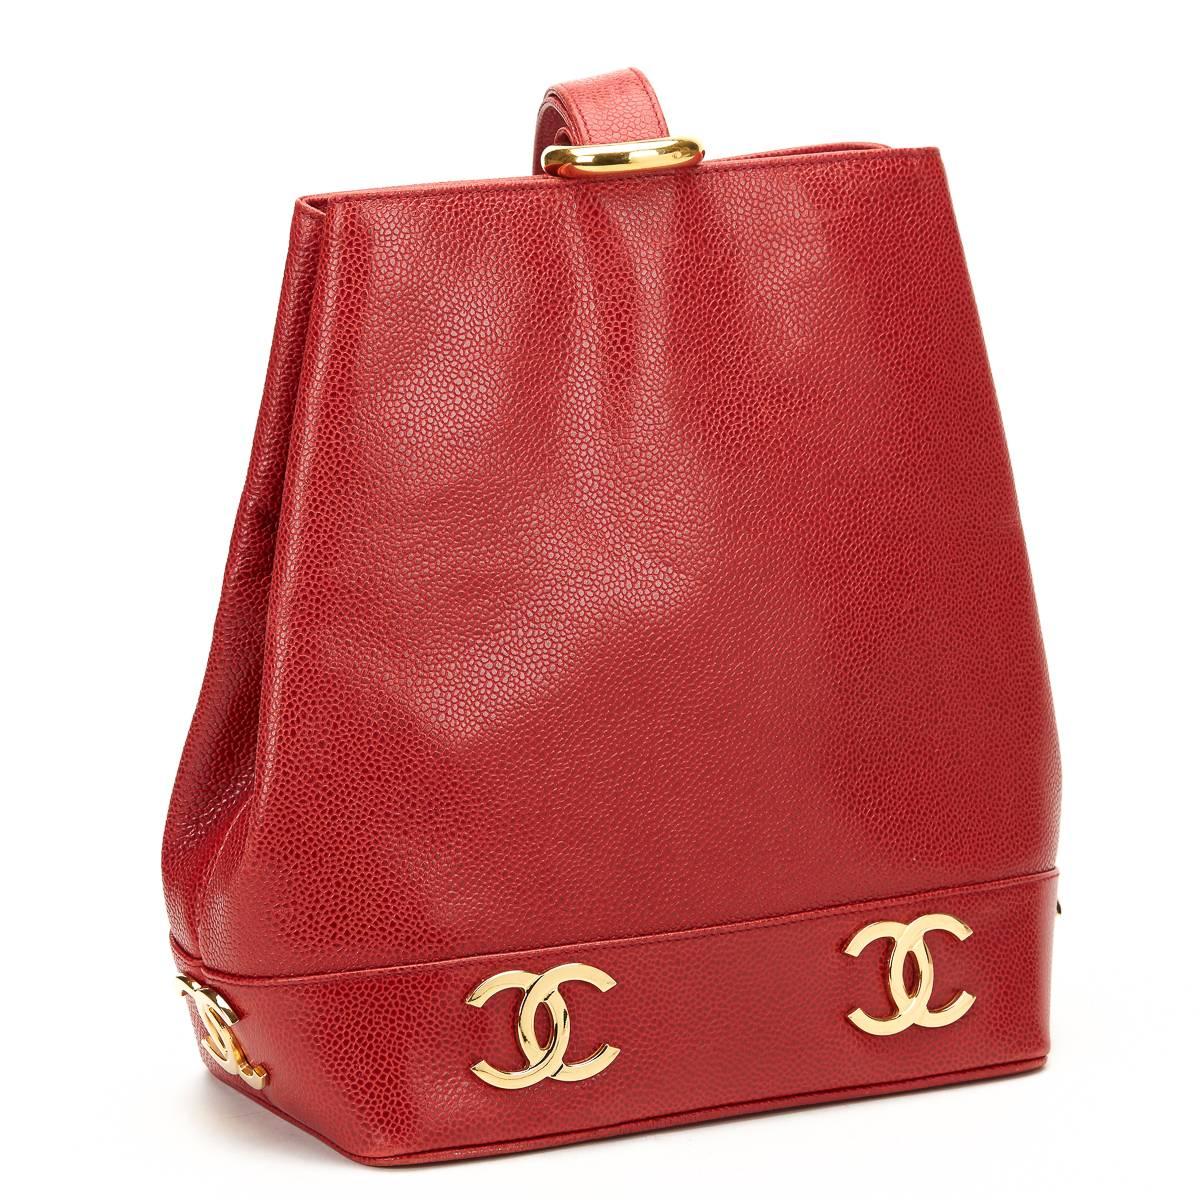 Women's 1990s Chanel Red Caviar Leather Vintage Bucket Bag